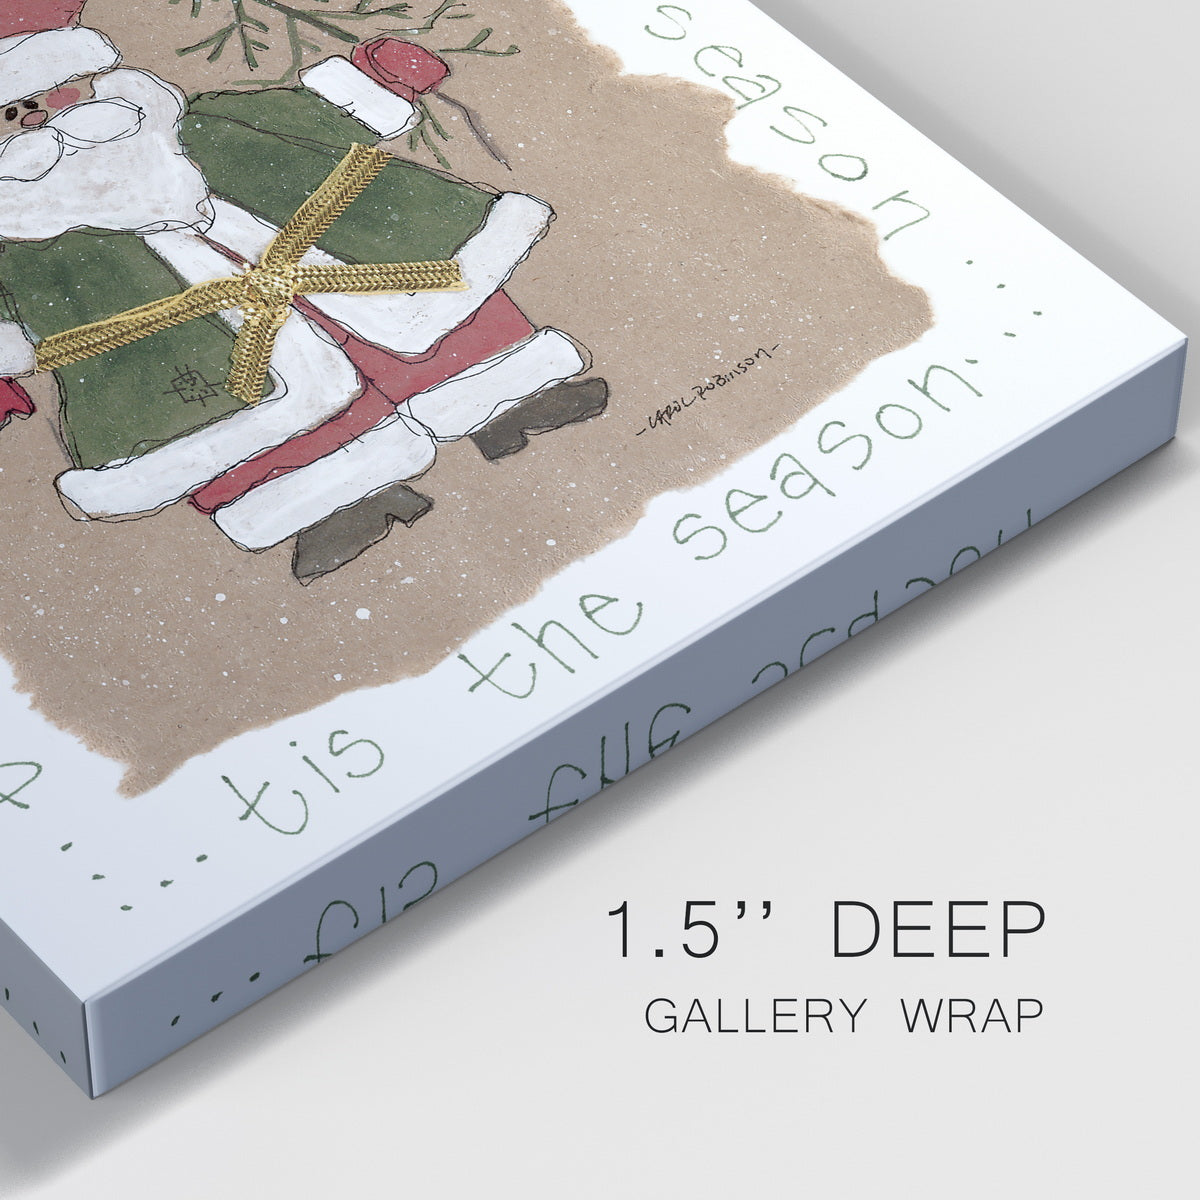 Santa - Premium Gallery Wrapped Canvas  - Ready to Hang